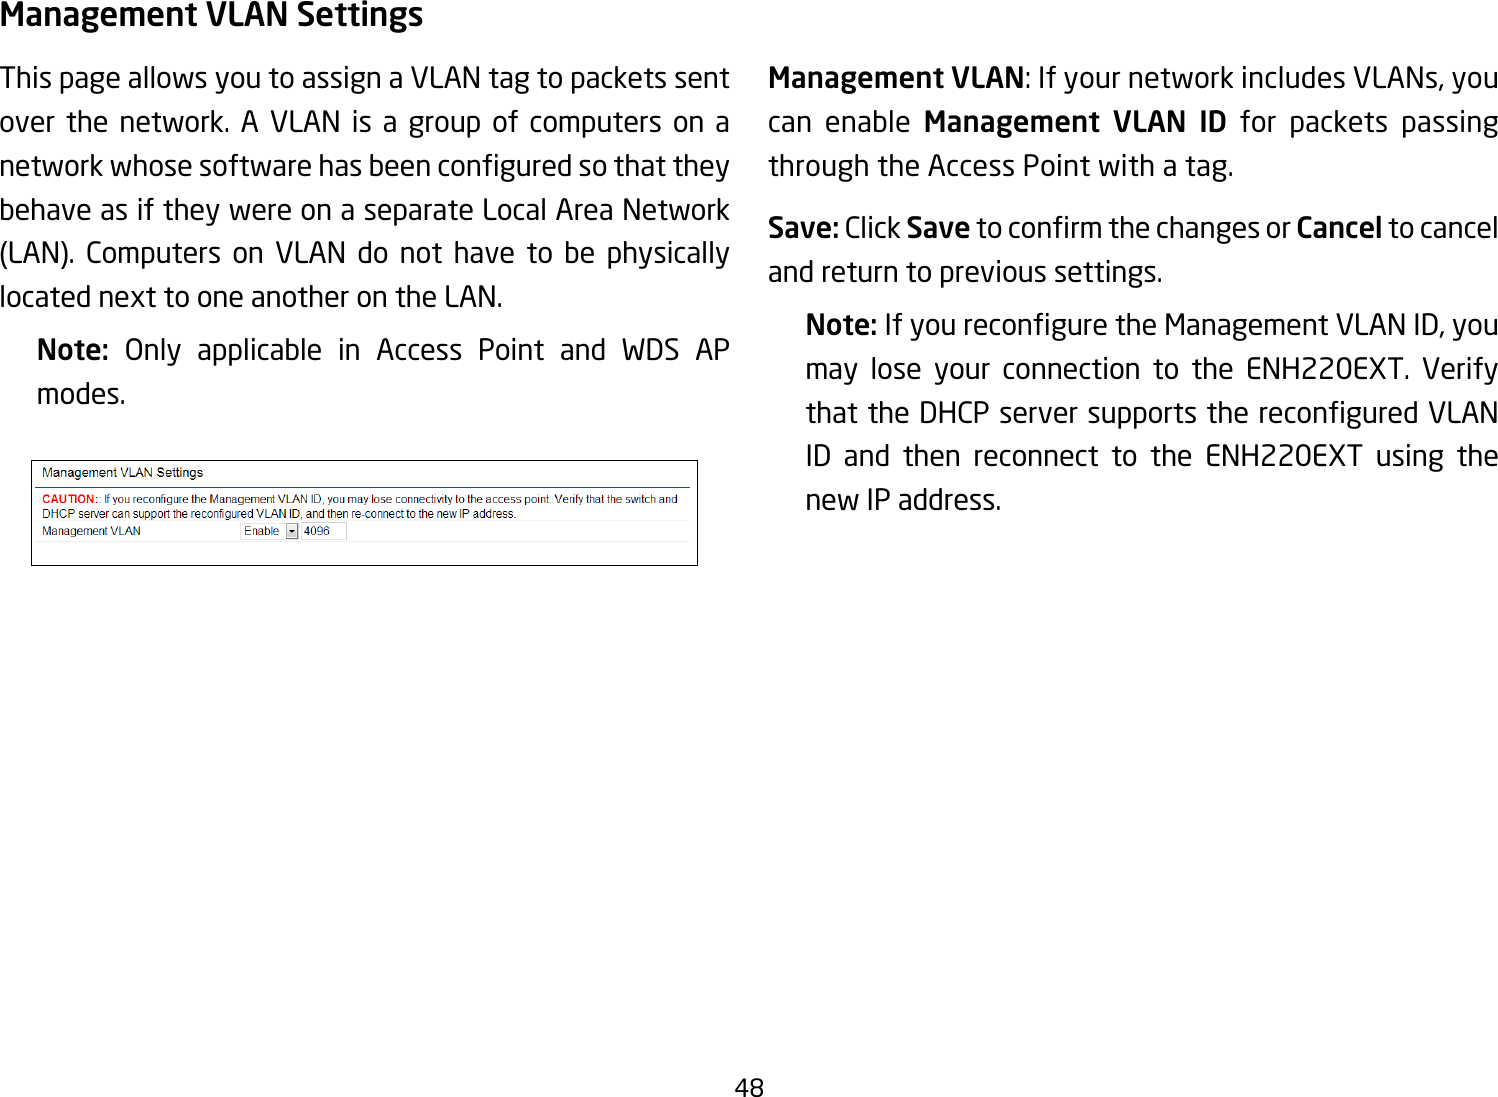 48Management VLAN SettingsThis page allows you to assign a VLAN tag to packets sent over the network. A VLAN is a group of computers on a networkwhosesoftwarehasbeenconguredsothattheybehave as if they were on a separate Local Area Network (LAN). Computers on VLAN do not have to be physicallylocated next to one another on the LAN.Note:  Only applicable in Access Point and WDS AP modes.     Management VLAN: If your network includes VLANs, you can enable Management VLAN ID for packets passing through the Access Point with a tag. Save: Click SavetoconrmthechangesorCancel to cancel and return to previous settings.Note: IfyoureconguretheManagementVLANID,youmay lose your connection to the ENH220EXT. Verify thattheDHCPserversupportsthereconguredVLANID and then reconnect to the ENH220EXT using the new IP address. 